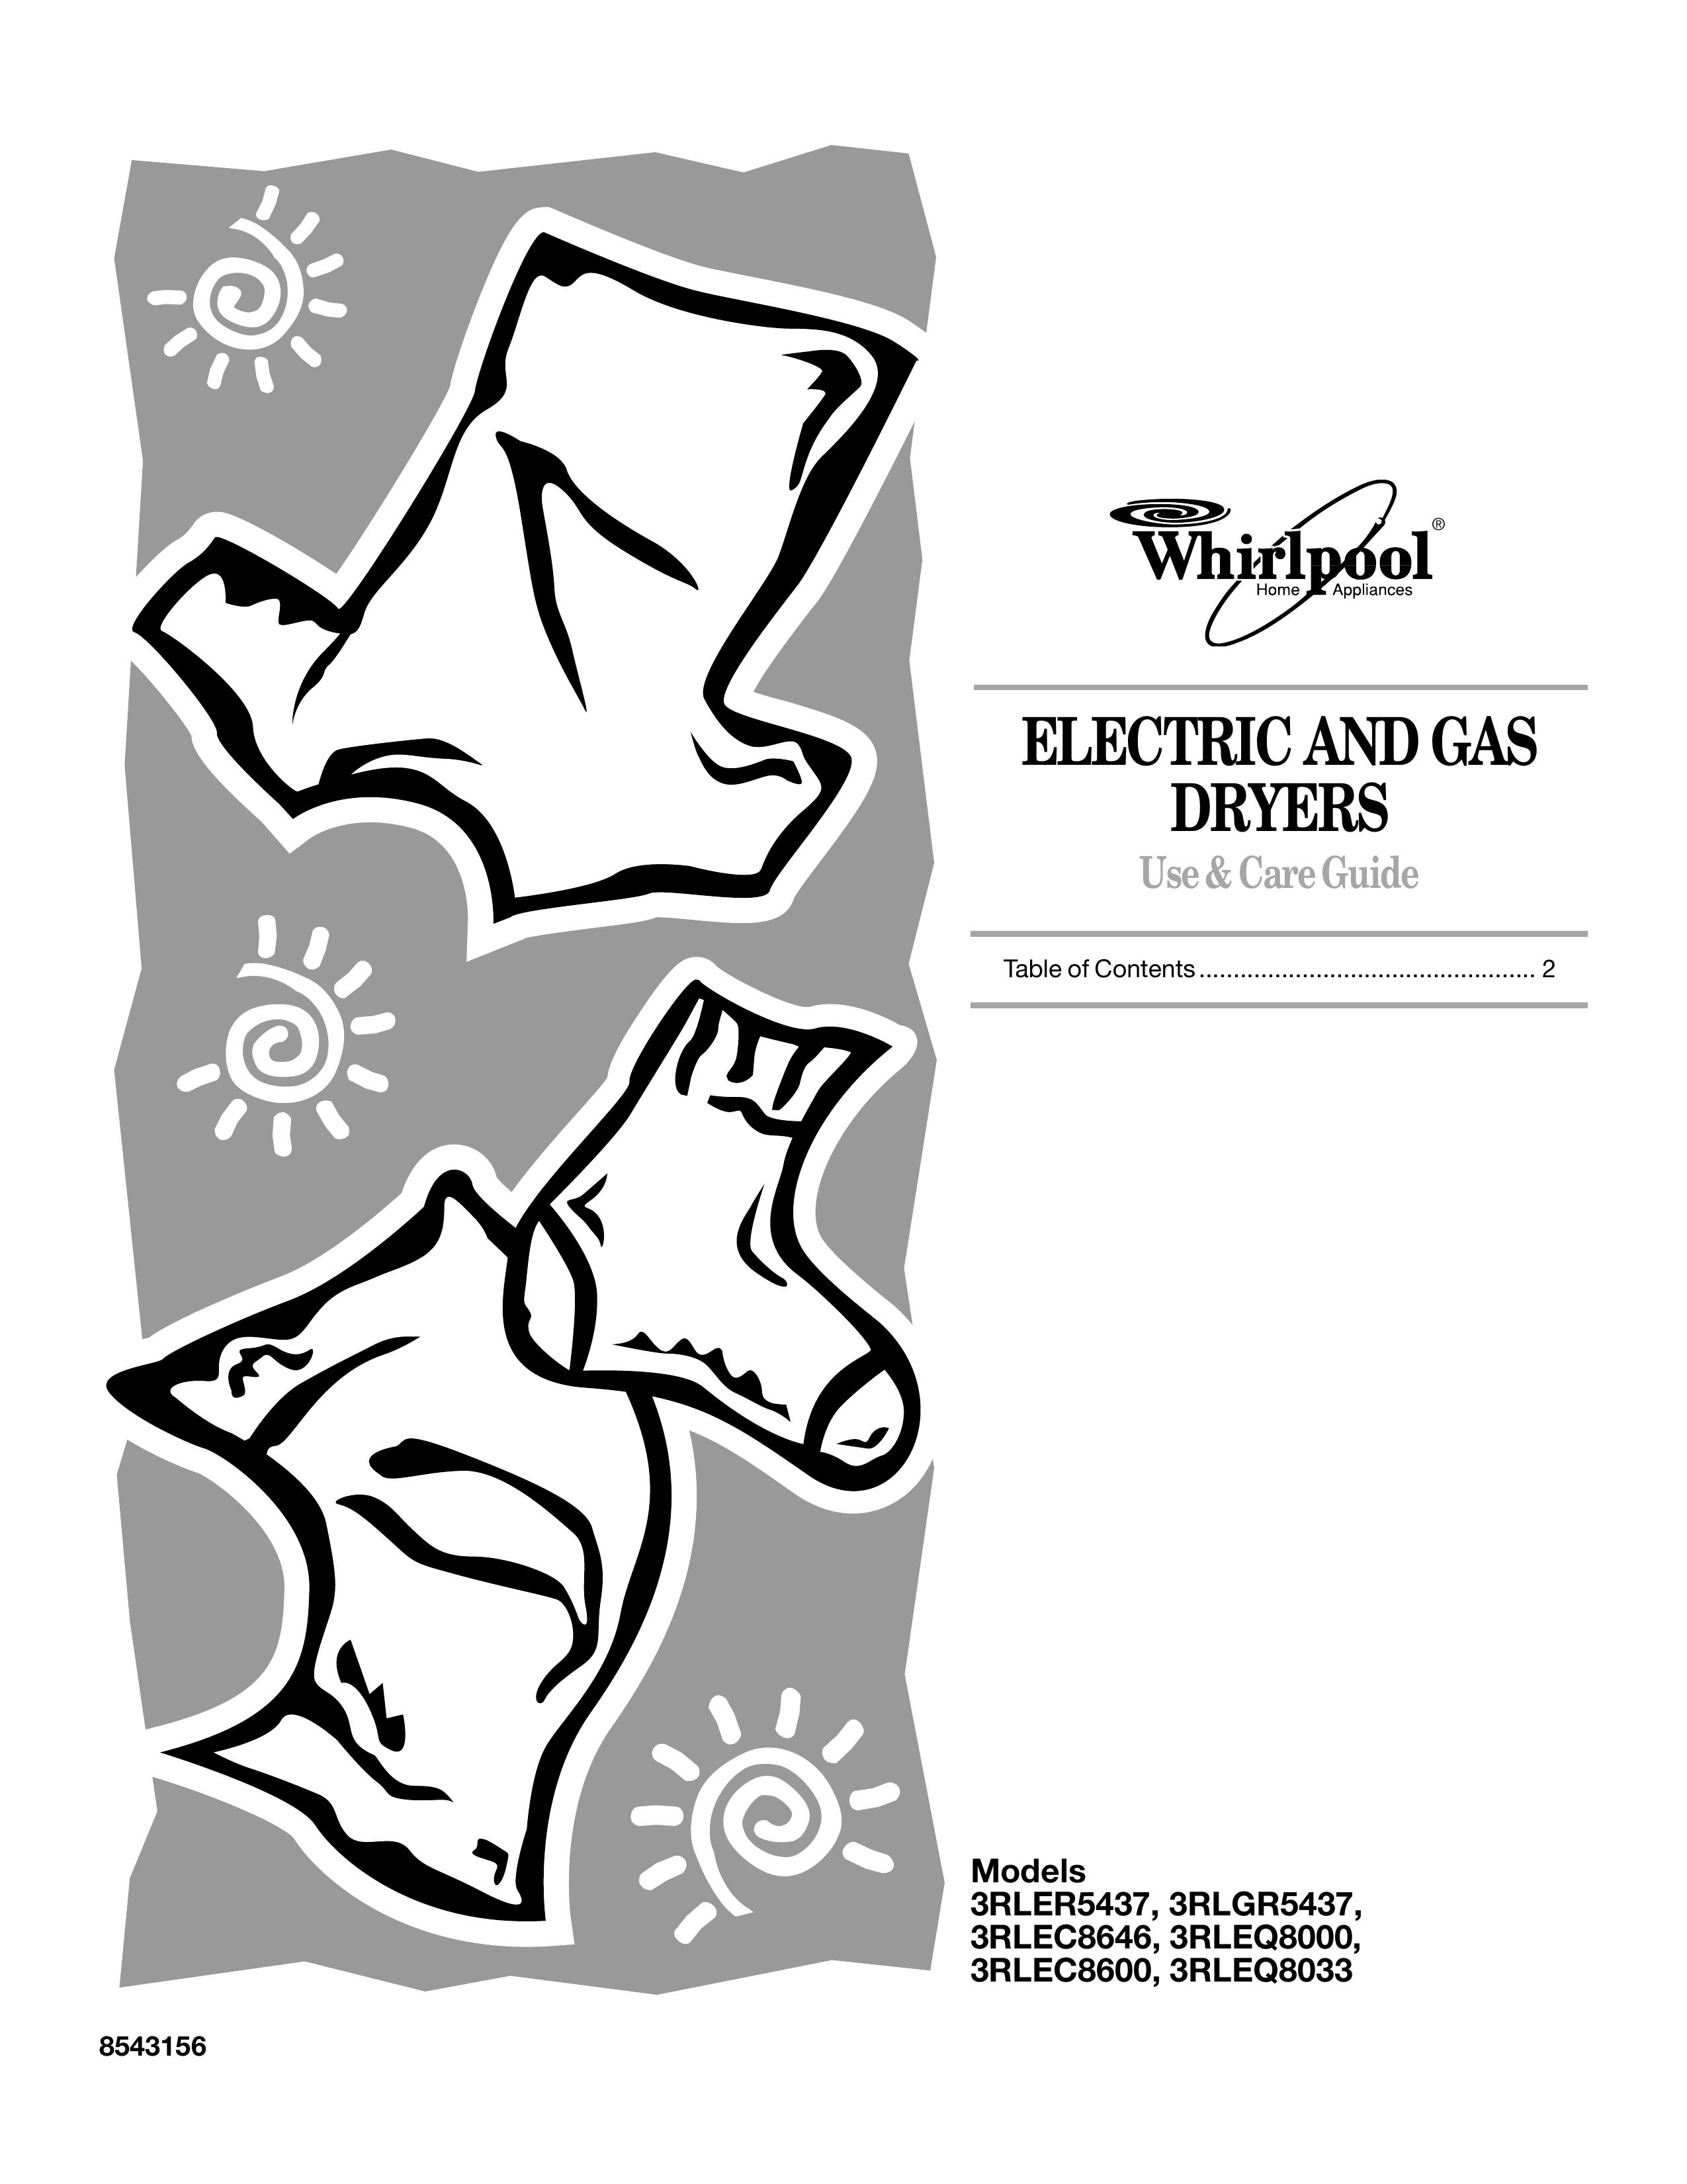 Whirlpool 3RLEQ8000 Clothes Dryer User Manual